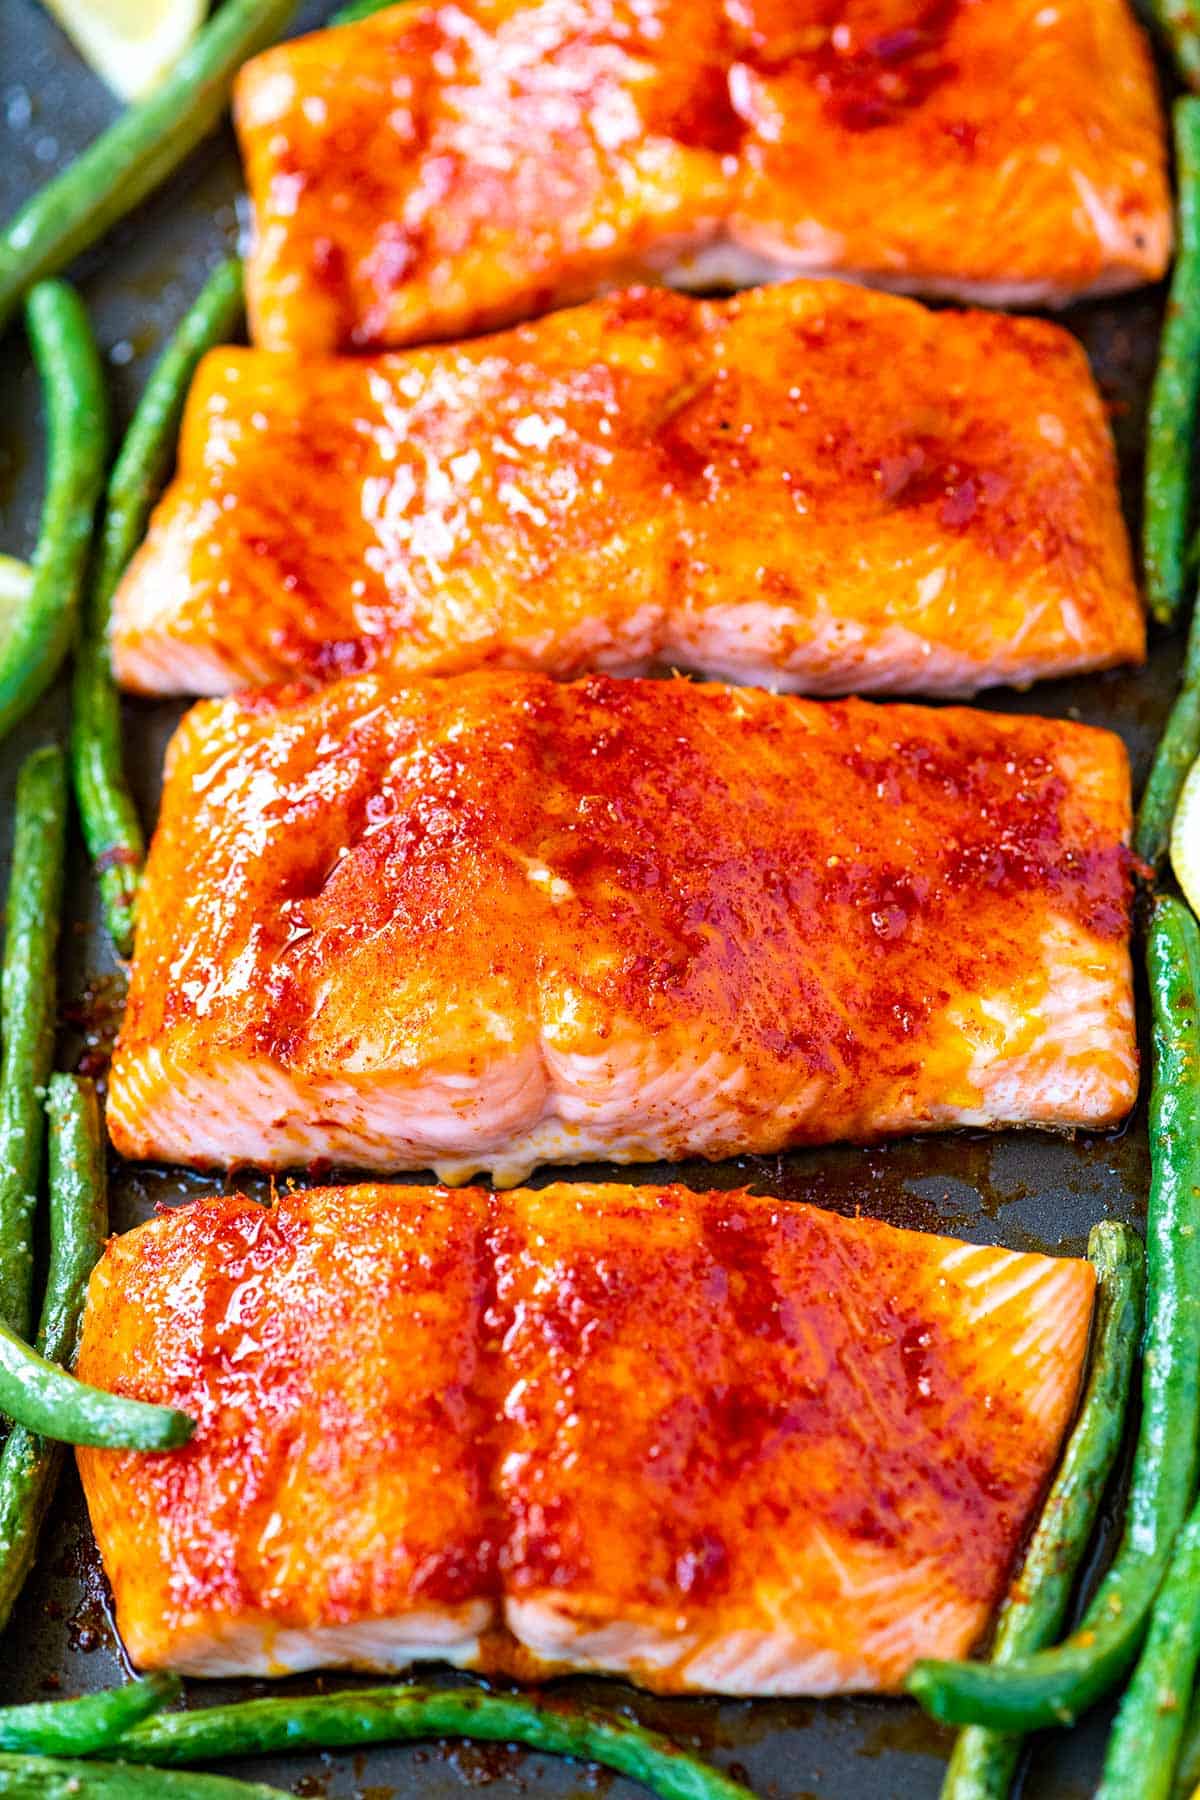 Baked Salmon rubbed with a brown sugar spice blend.